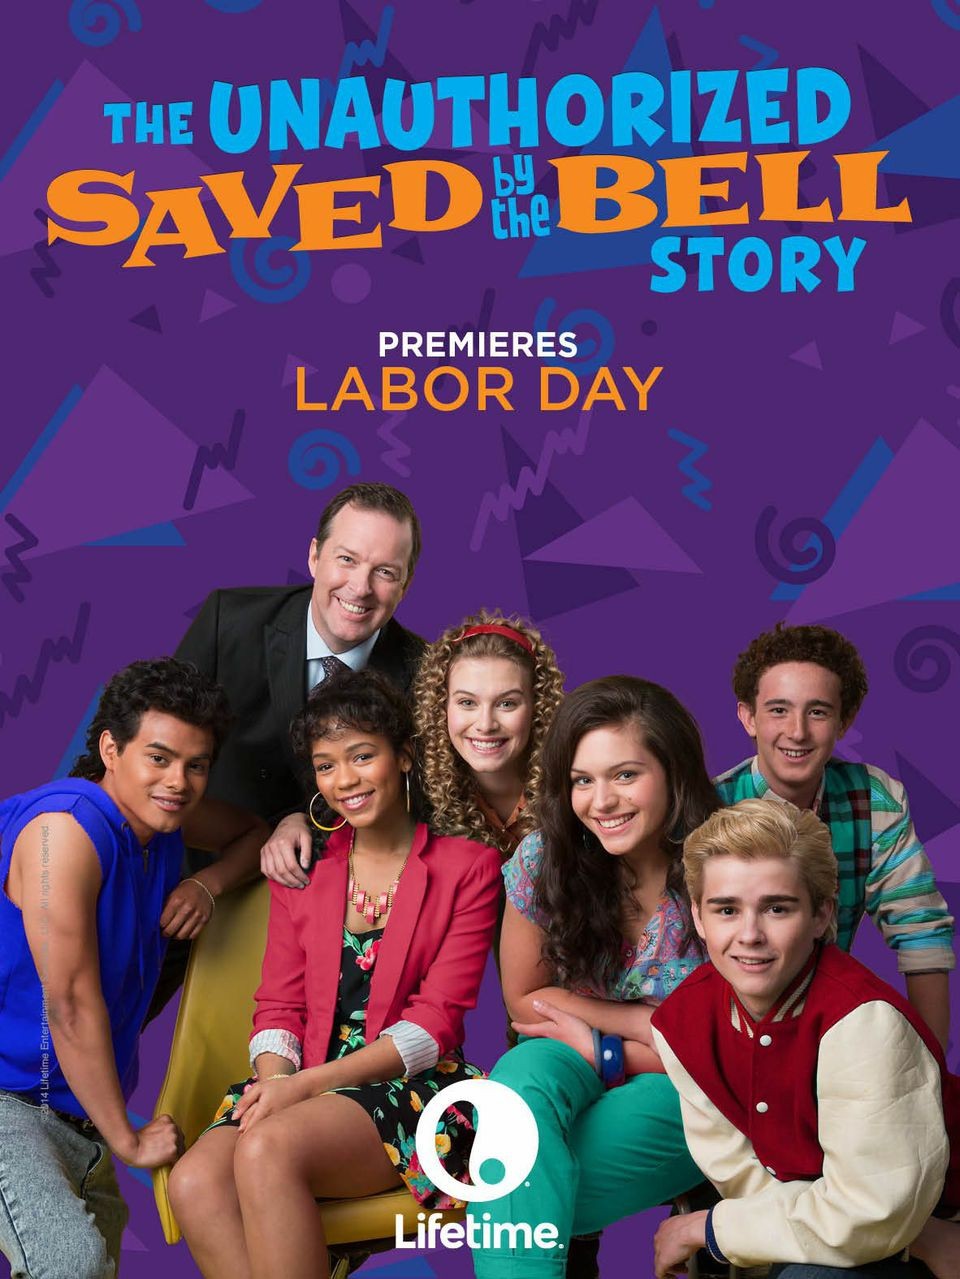 Extra Large TV Poster Image for The Unauthorized Saved by the Bell Story 